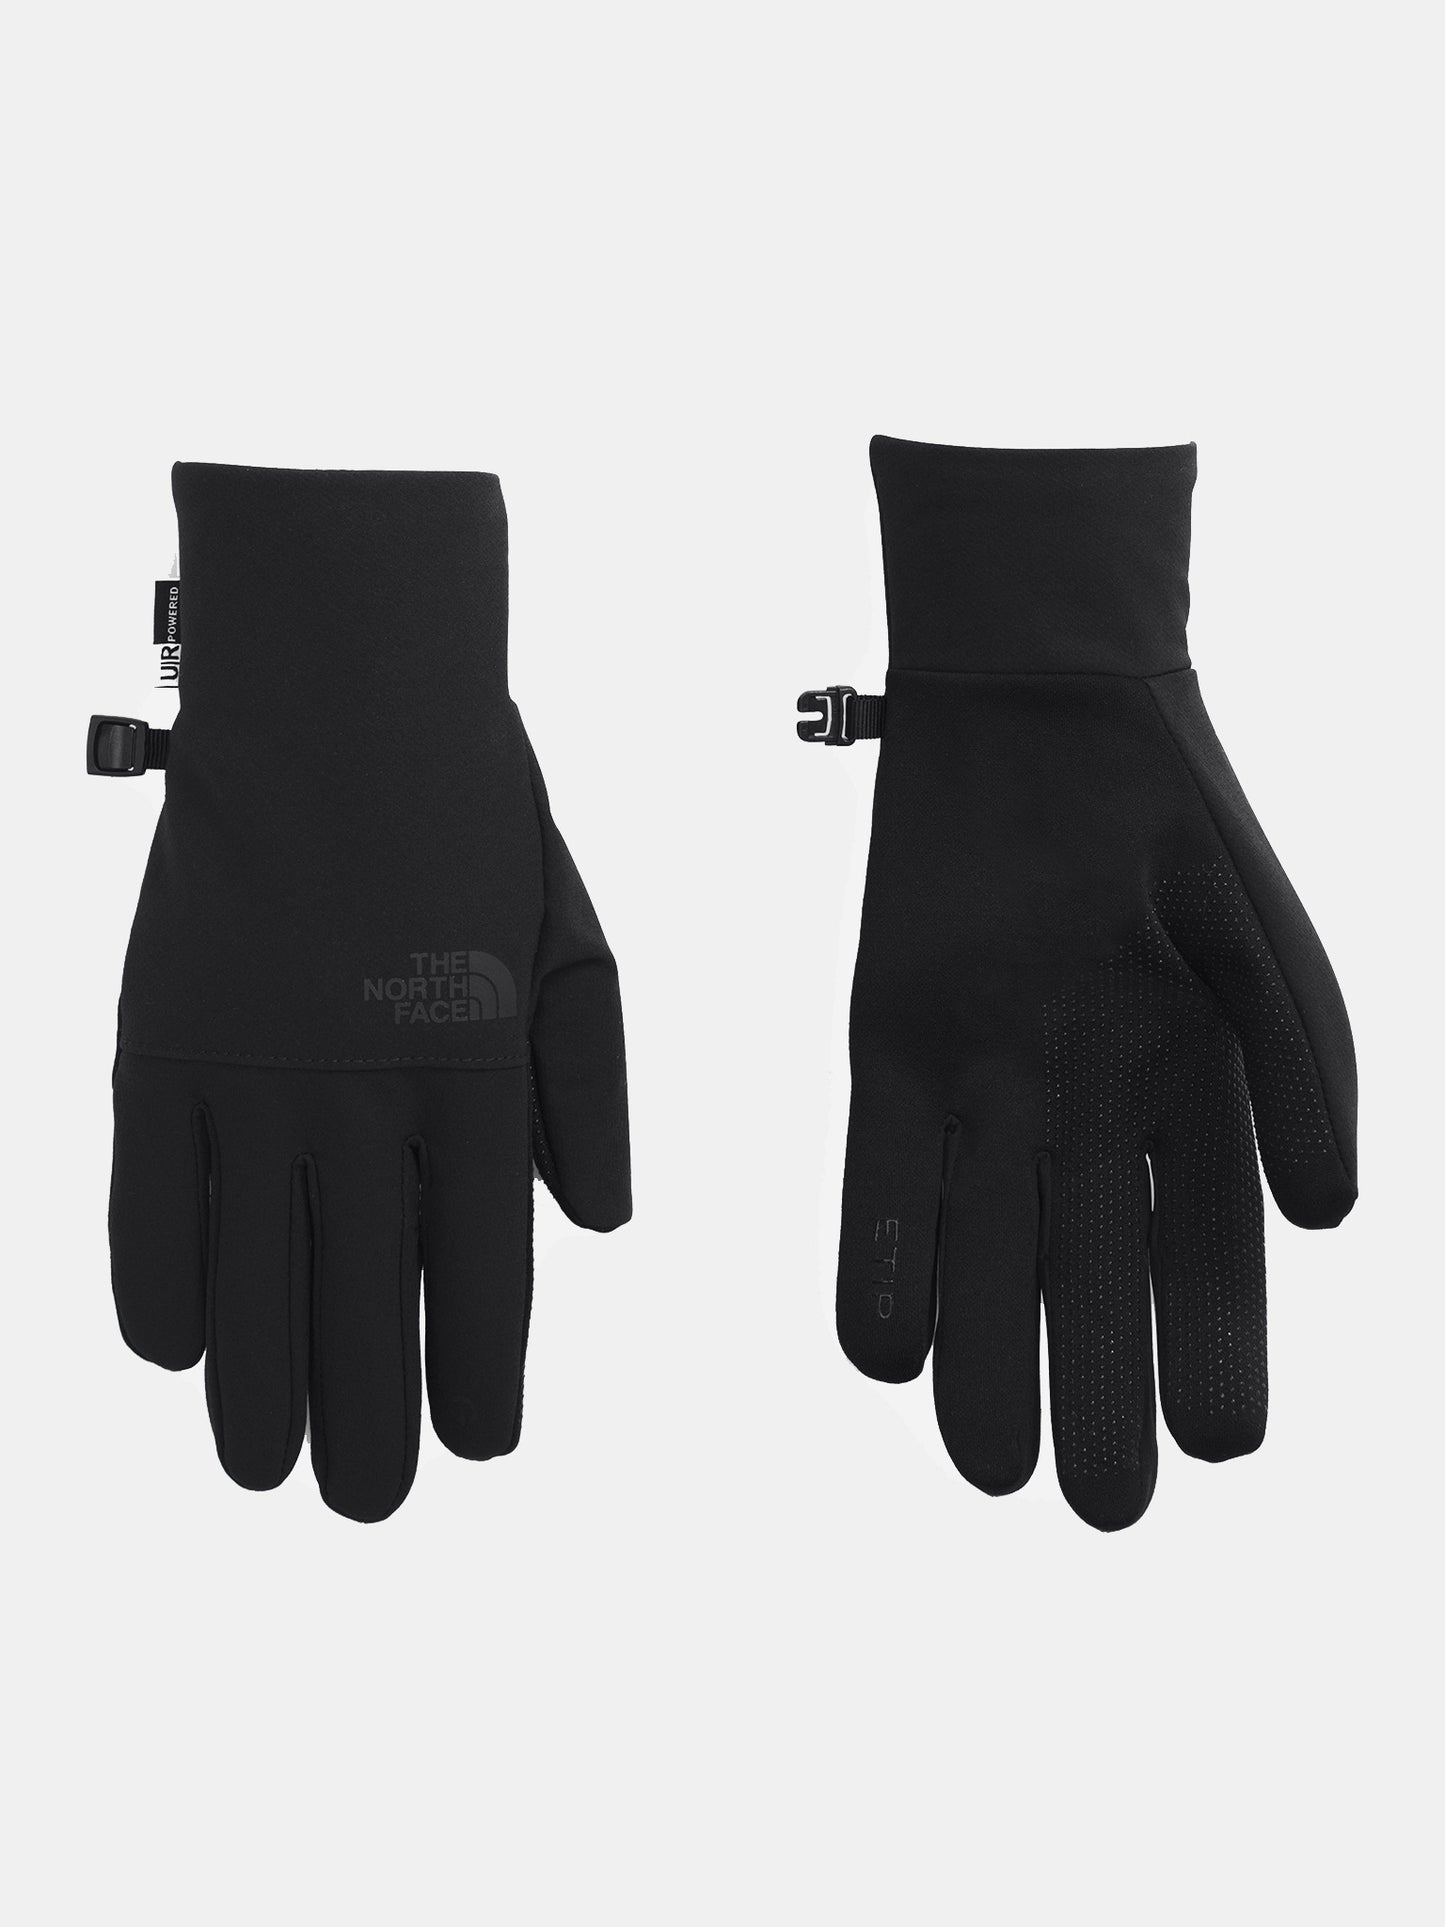 The North Face Etip Recycled Tech Glove